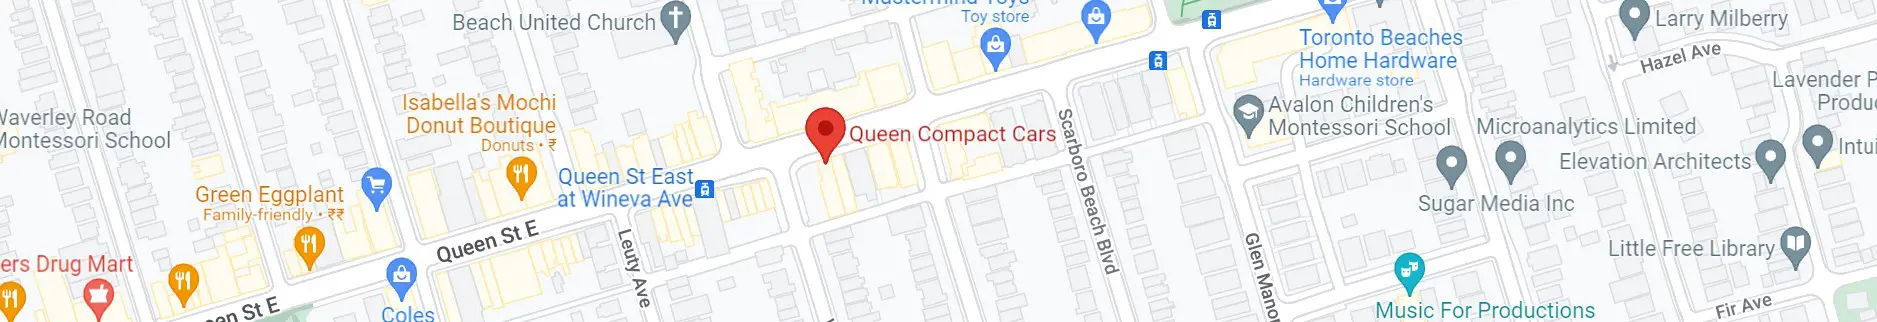 Queen Compact Cars